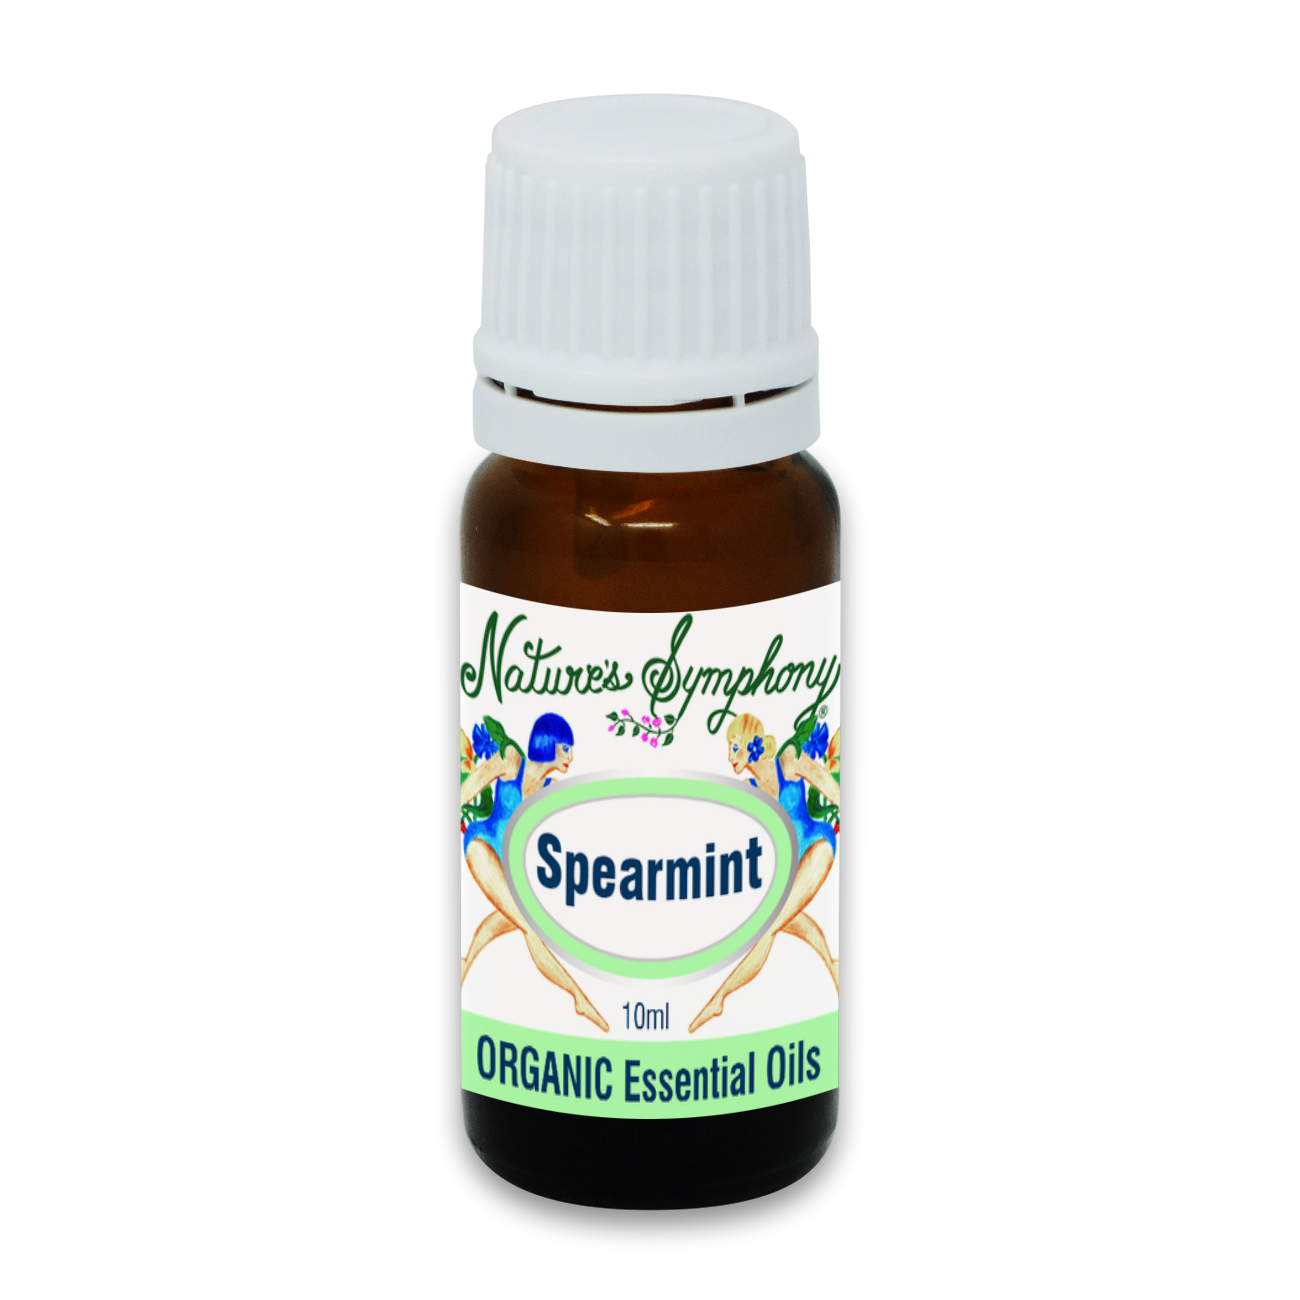 Spearmint, Organic/Wildcrafted oil - 10ml